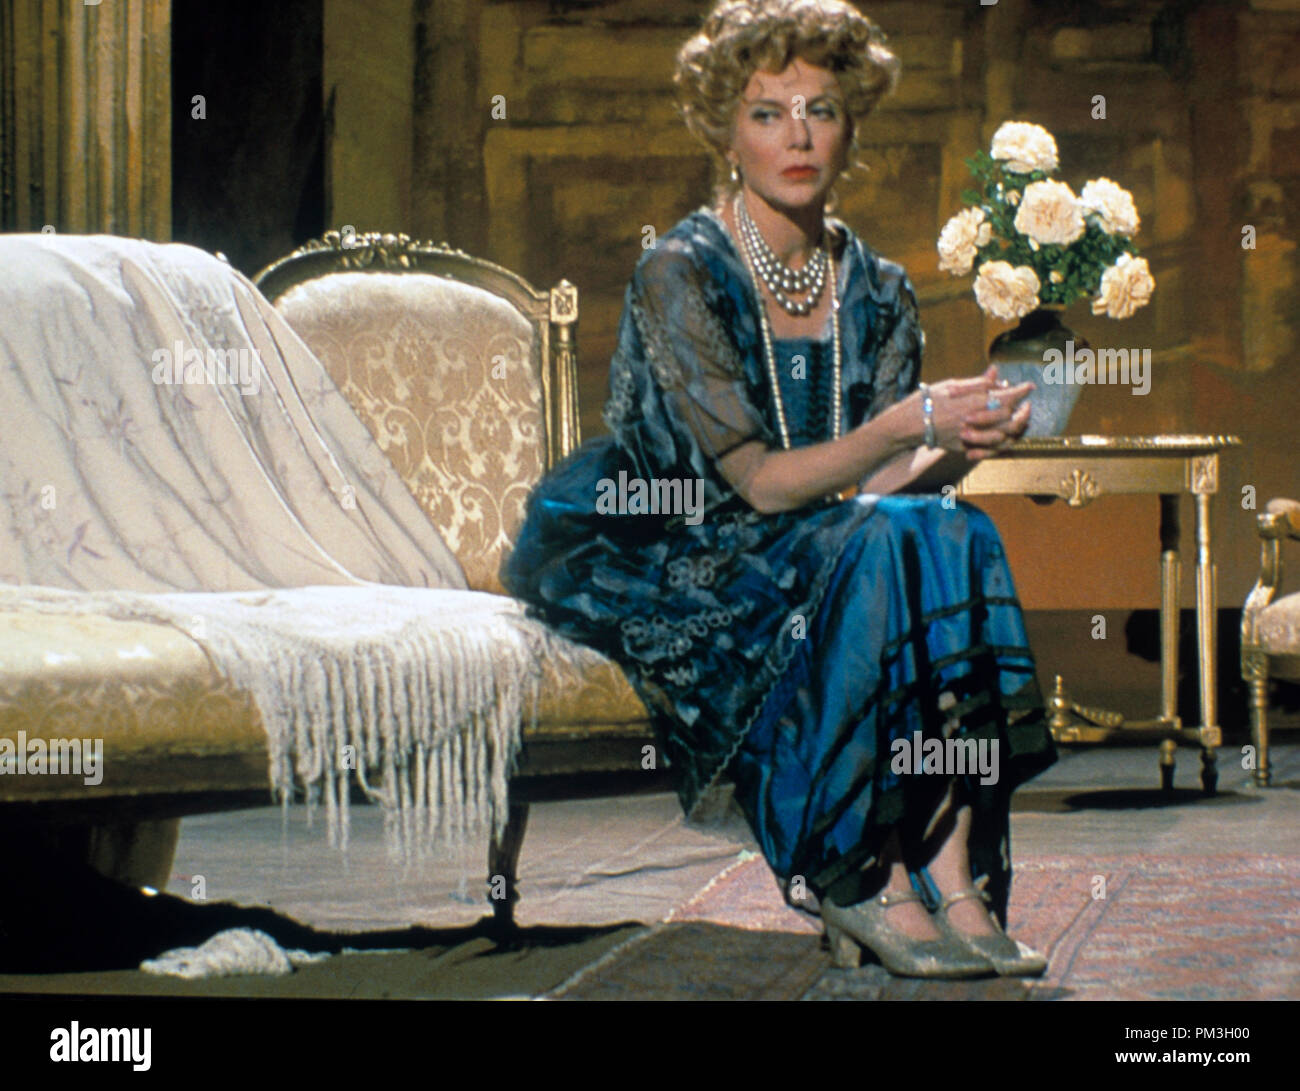 Film Still from 'Being Julia' Annette Bening © 2004 Sony Pictures Photo Alex Dukay  File Reference # 30735727THA  For Editorial Use Only -  All Rights Reserved Stock Photo